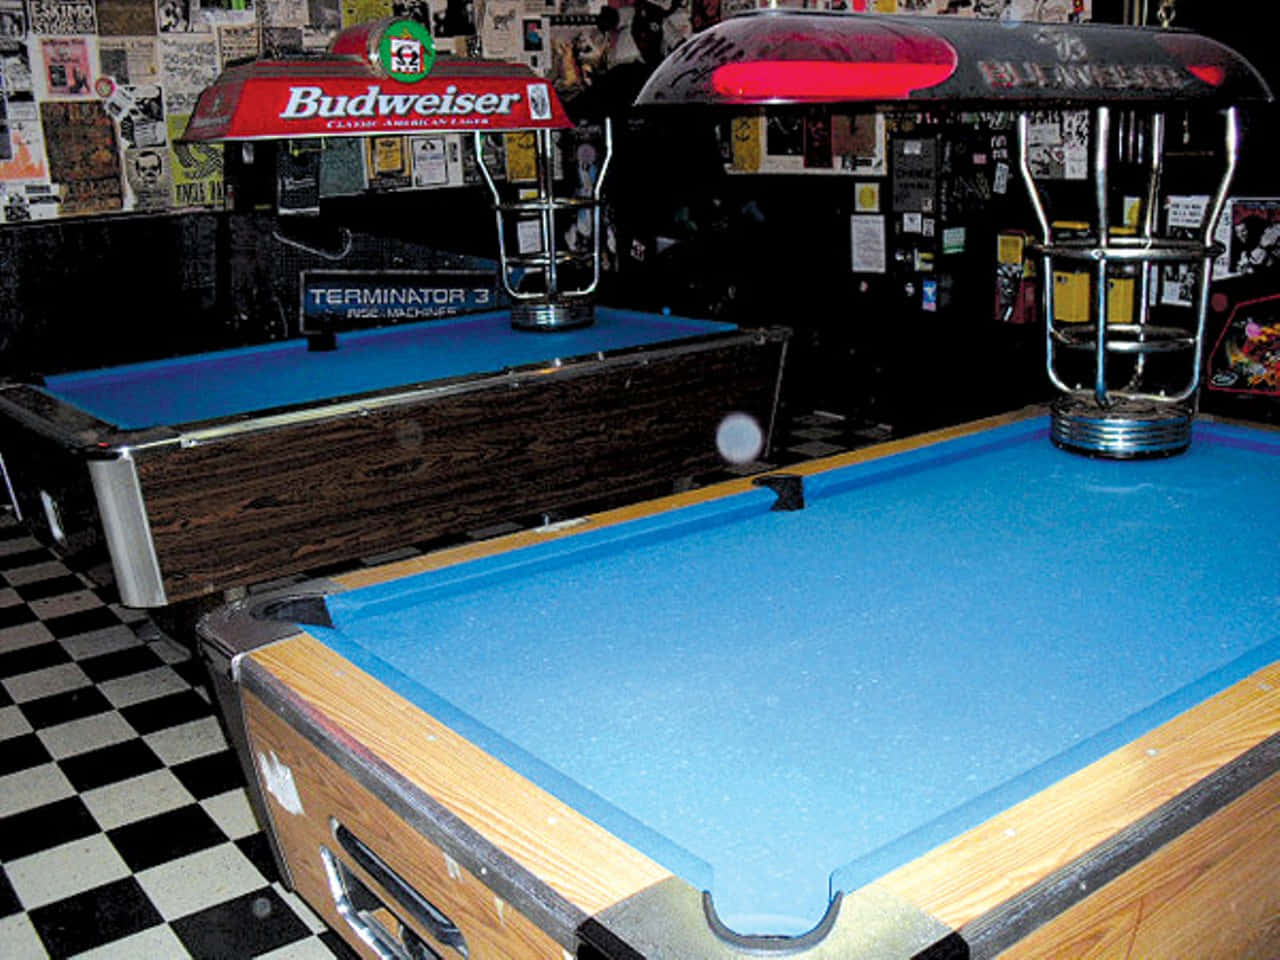 Improve Your Billiards Skills on a High Quality Pool Table